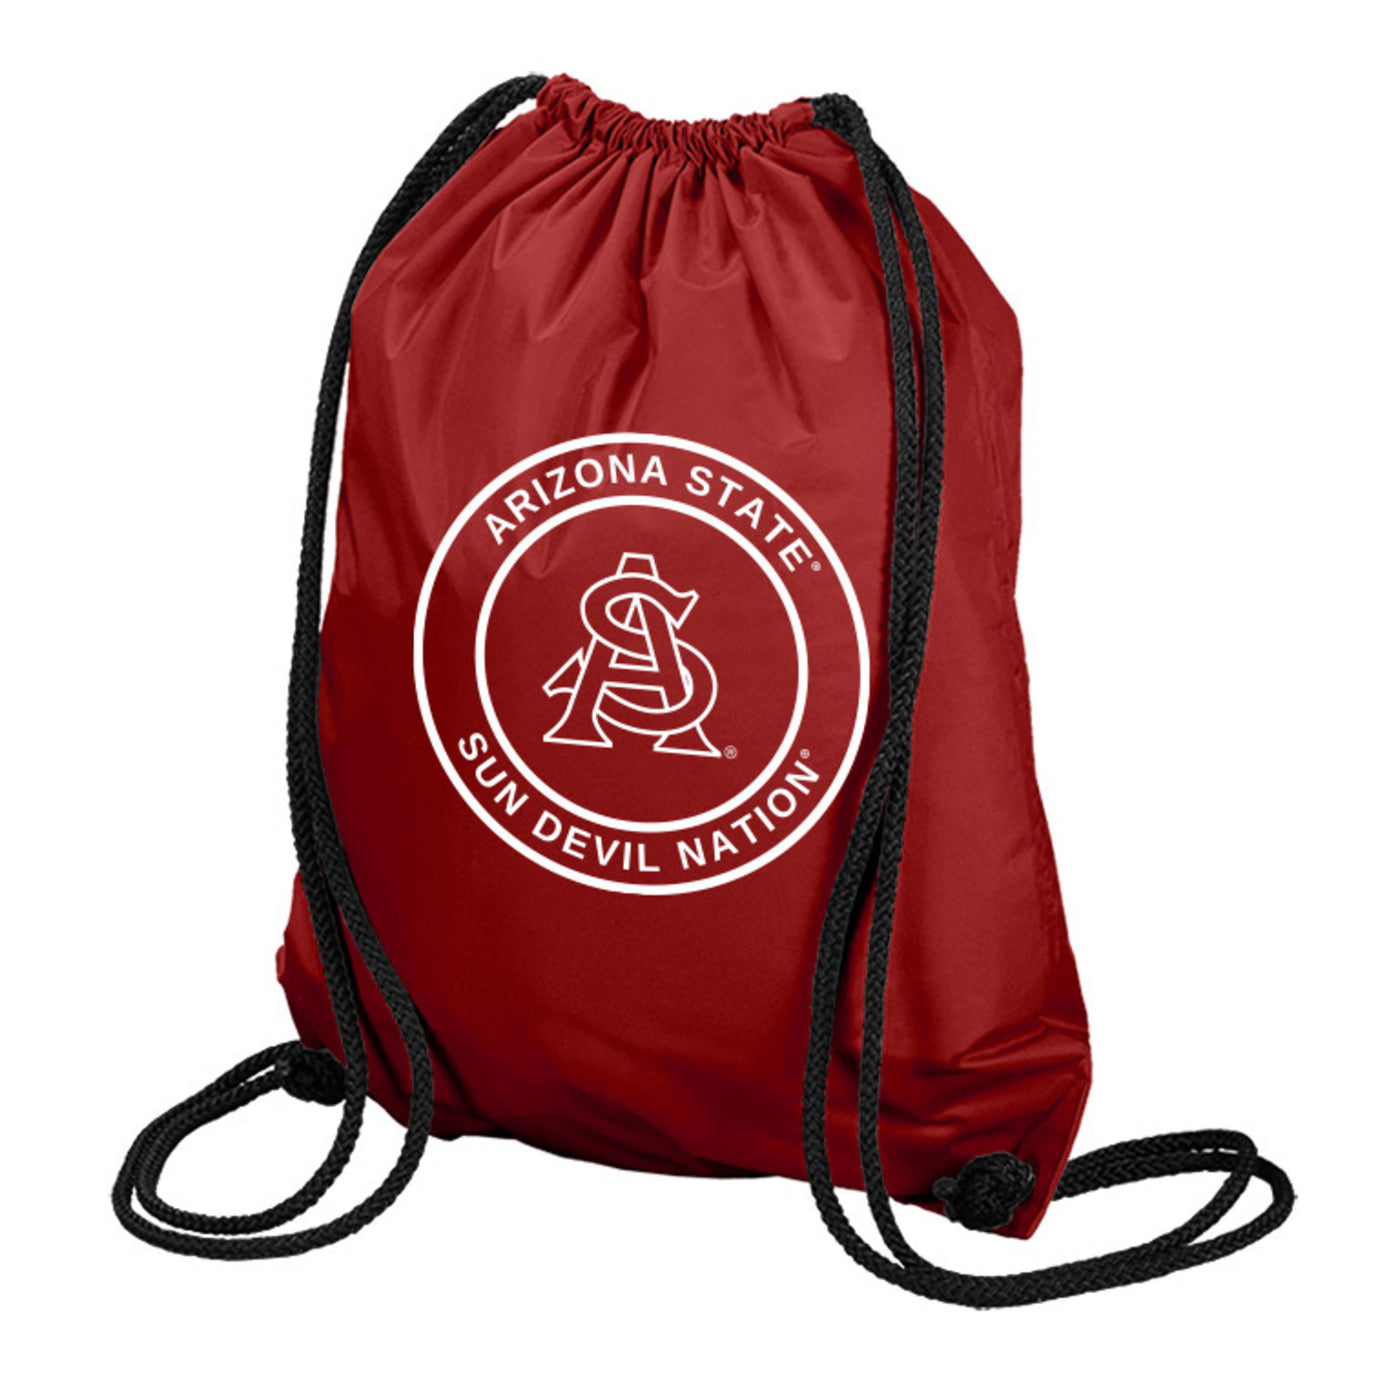 ASU maroon string backpack. Features a white A and S logo with 